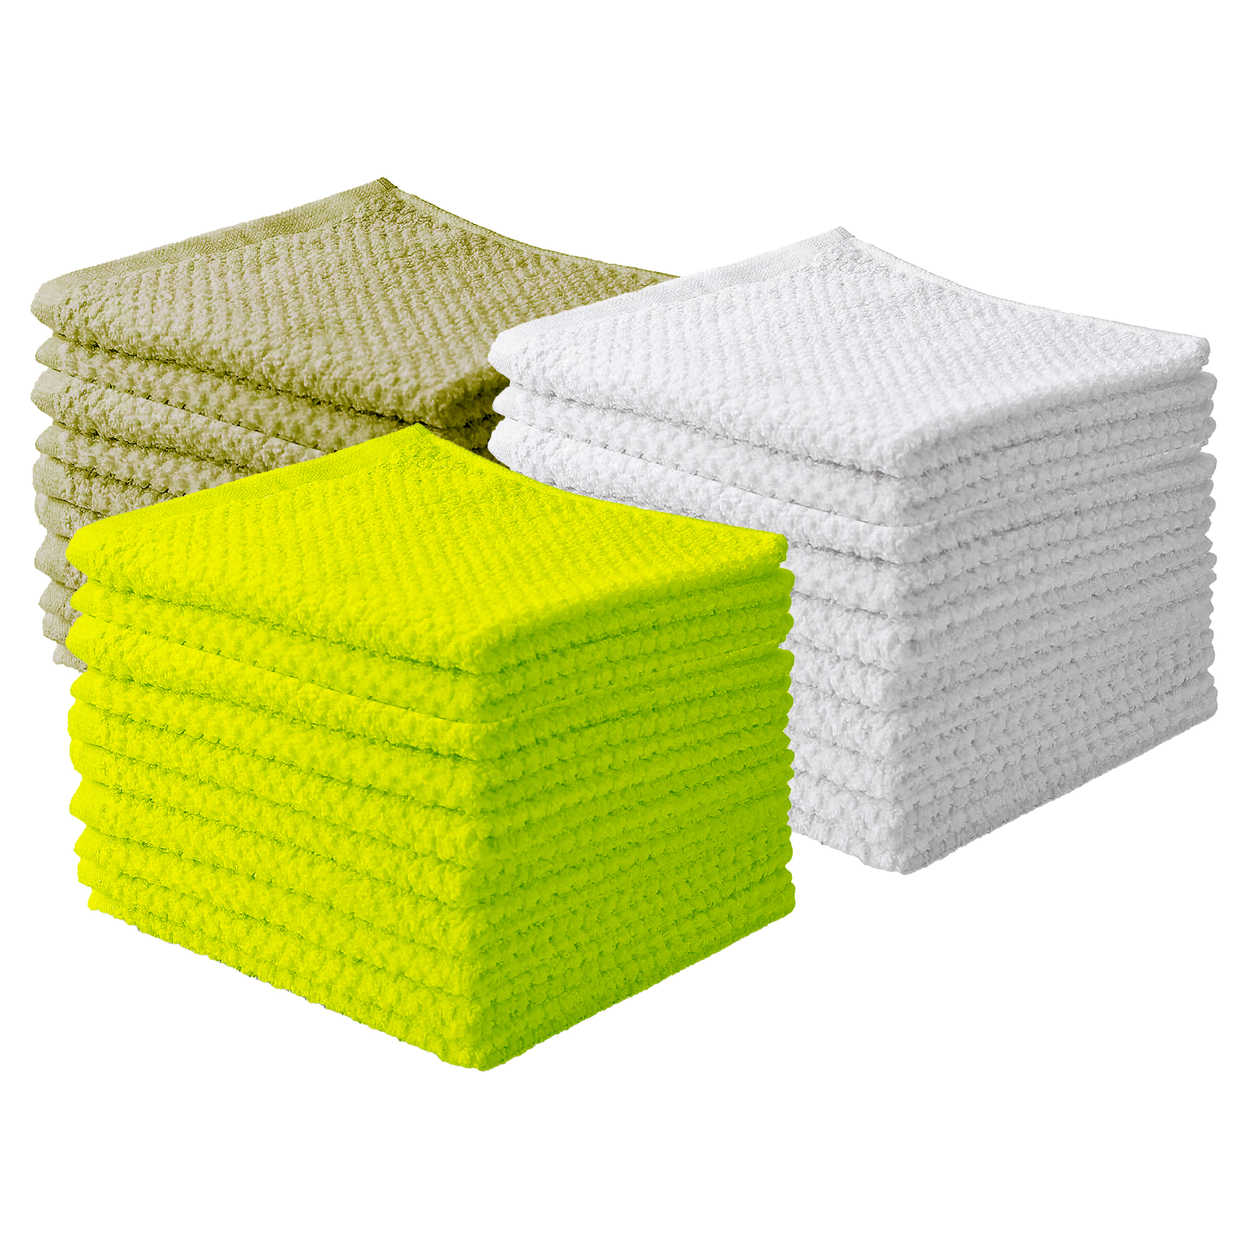 Multi-Pack: Multipurpose Super Absorbent Ultra Soft 100% Cotton Ring Spun Stitched Wash Cloths - 10-pack